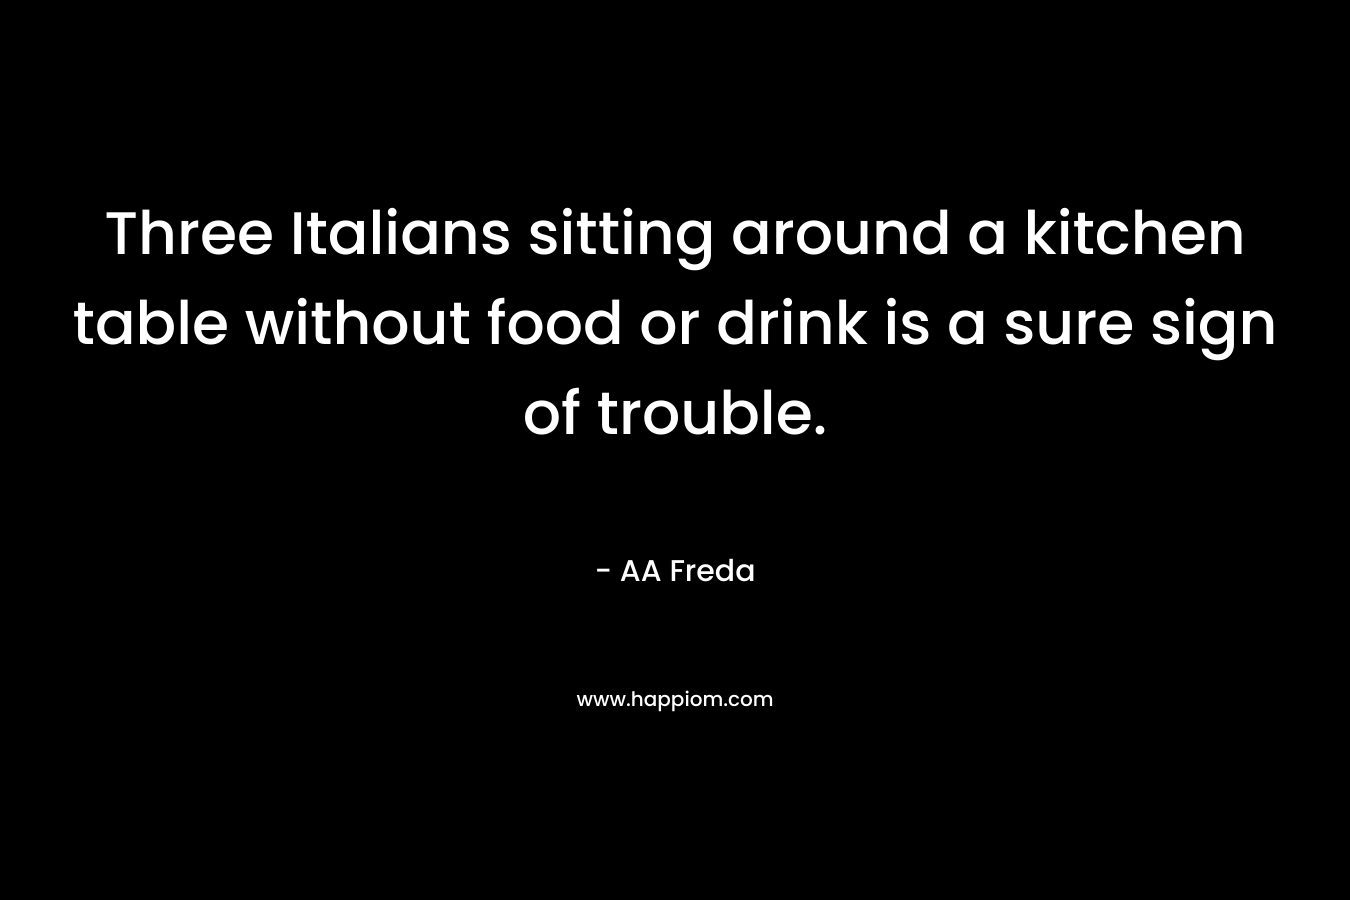 Three Italians sitting around a kitchen table without food or drink is a sure sign of trouble.